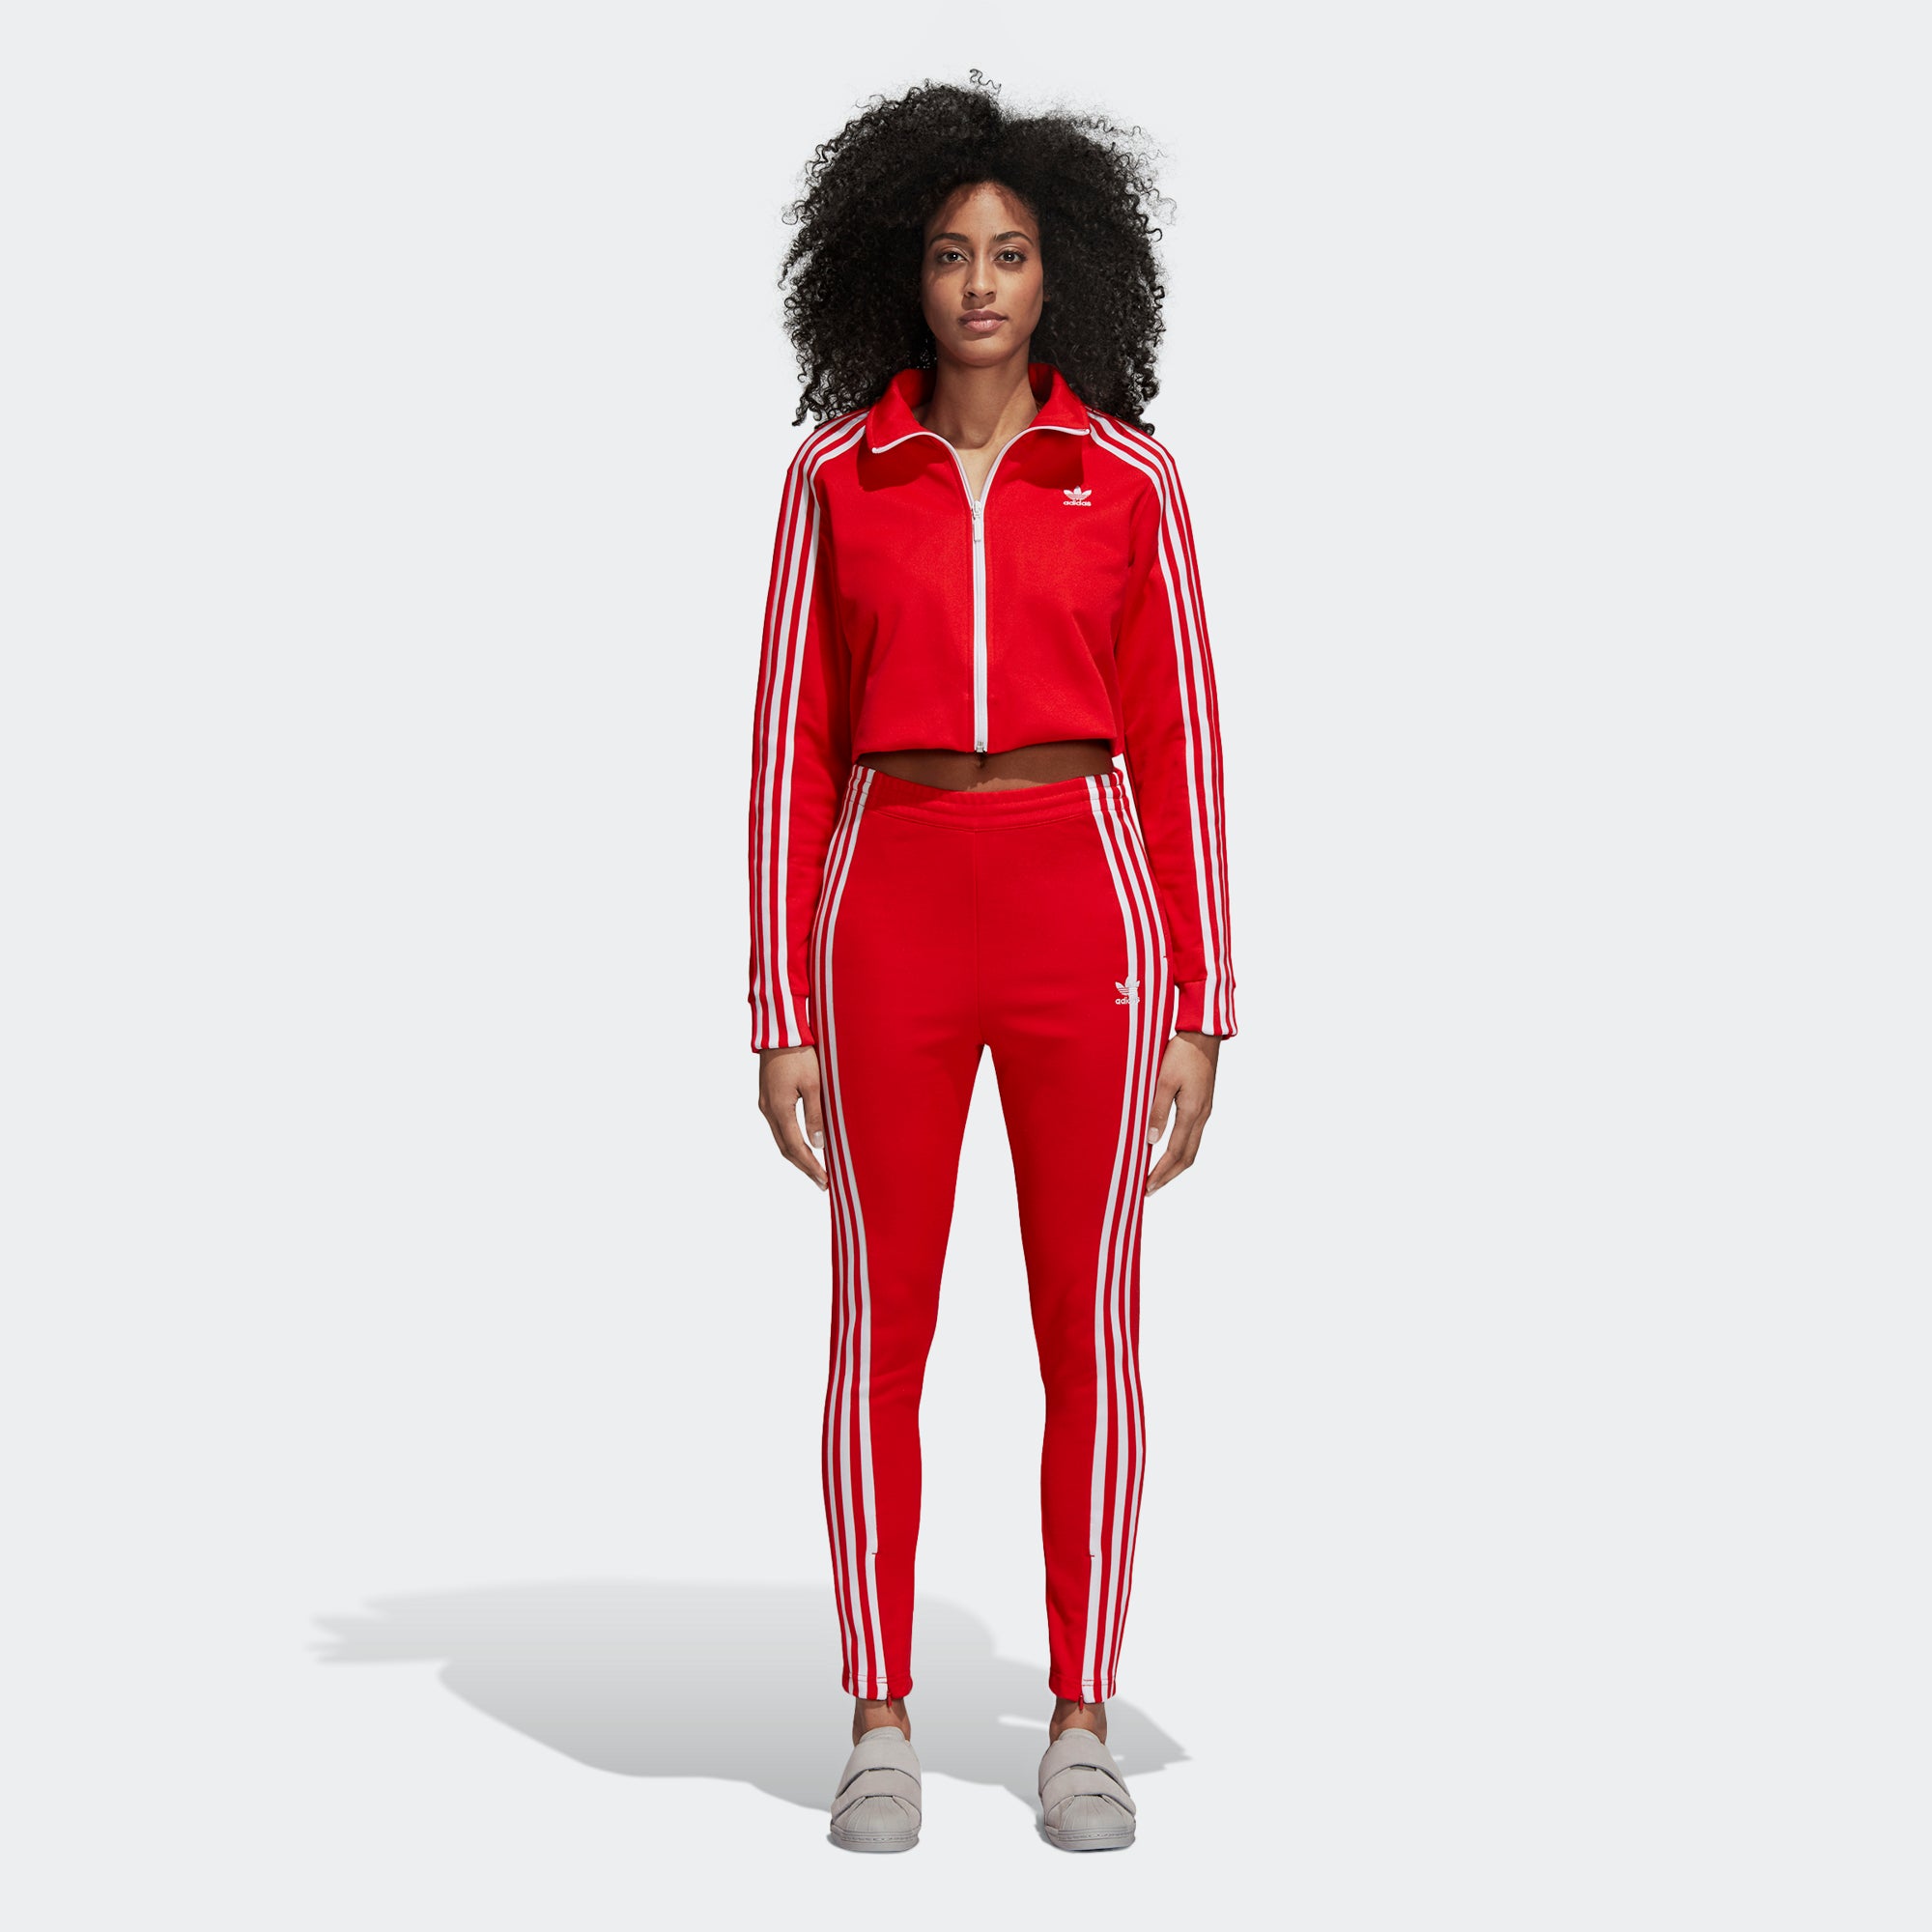 red adidas jacket outfit